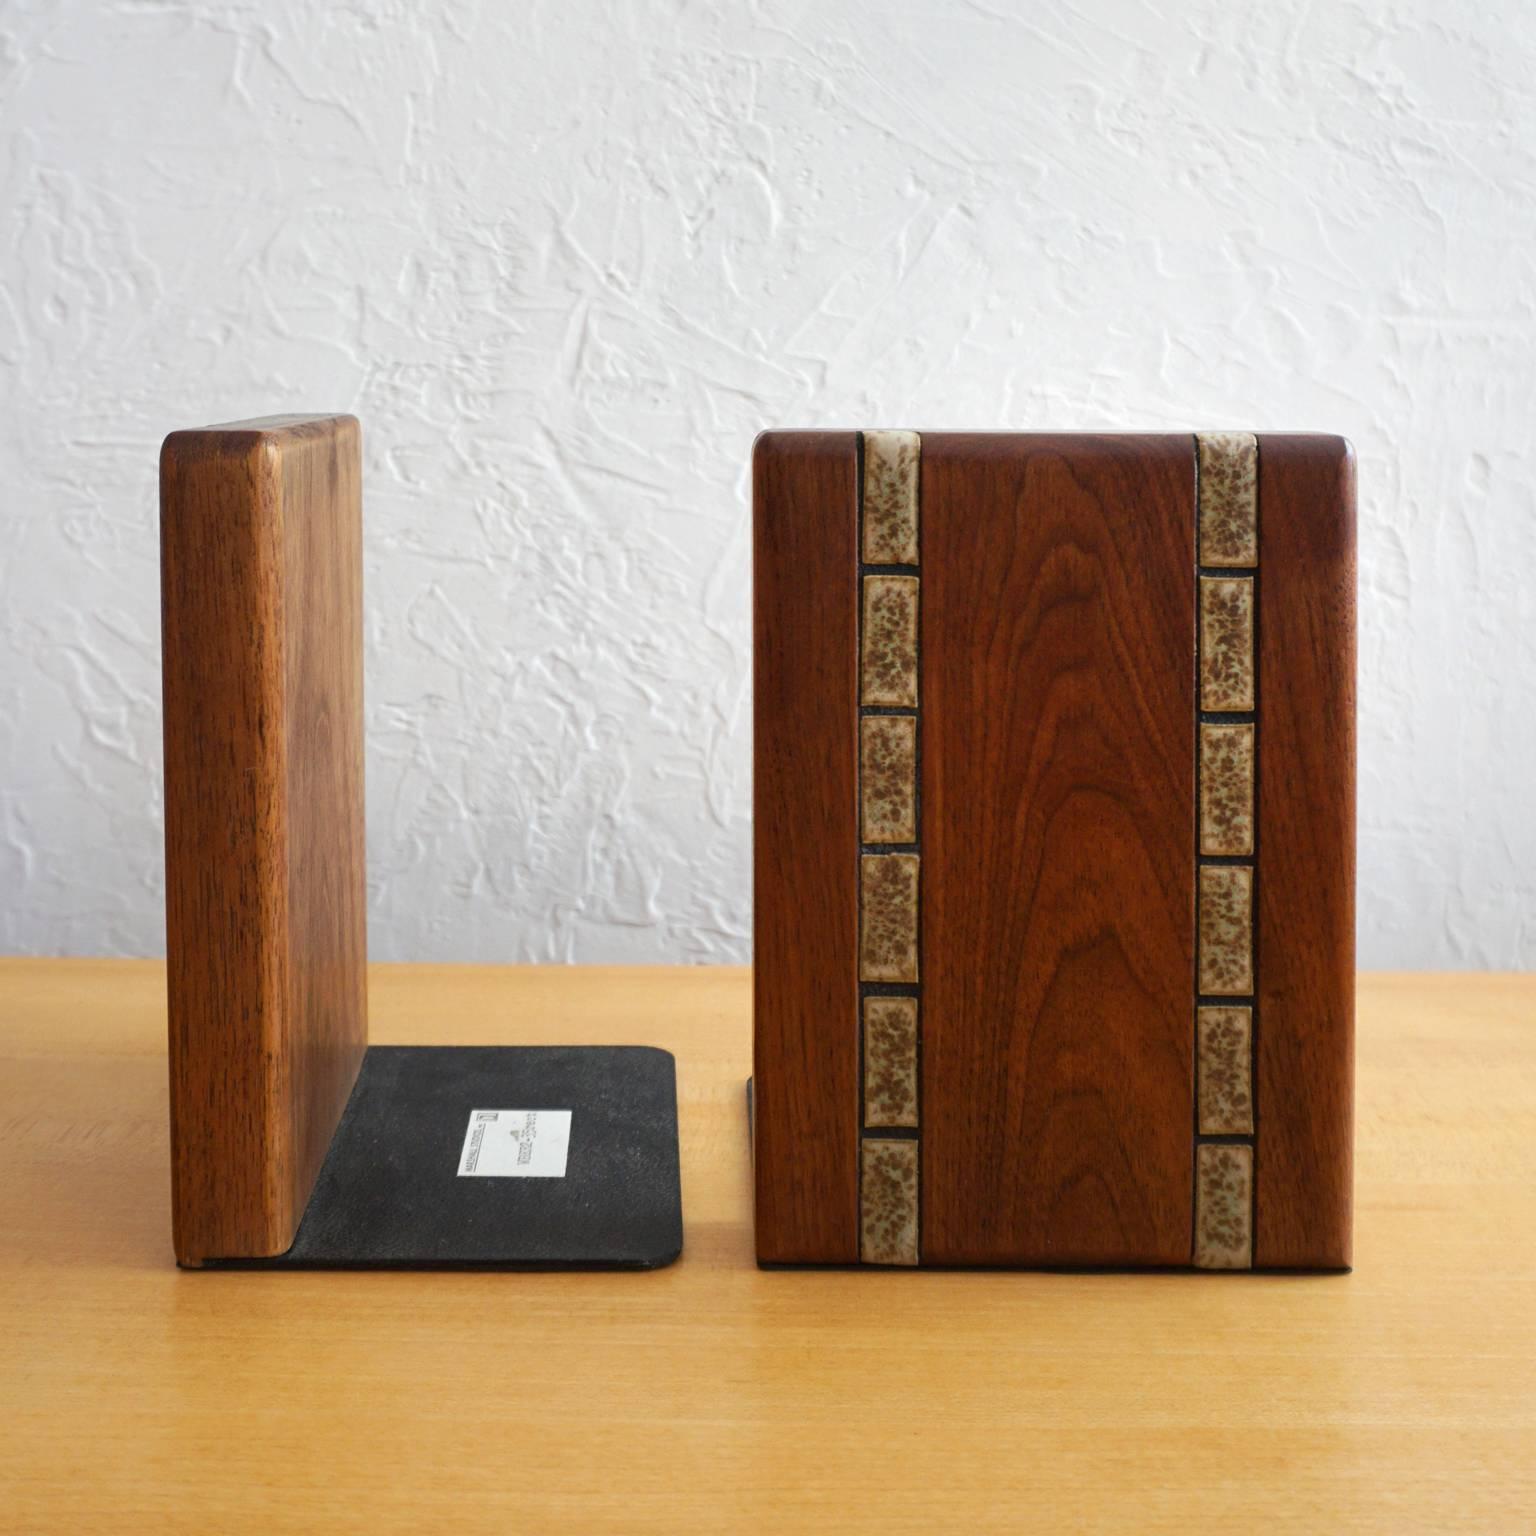 Bookends by Jane and Gordon Martz for their company, Marshall Studios. Oiled walnut with glazed ceramic elements. Retains an original label.